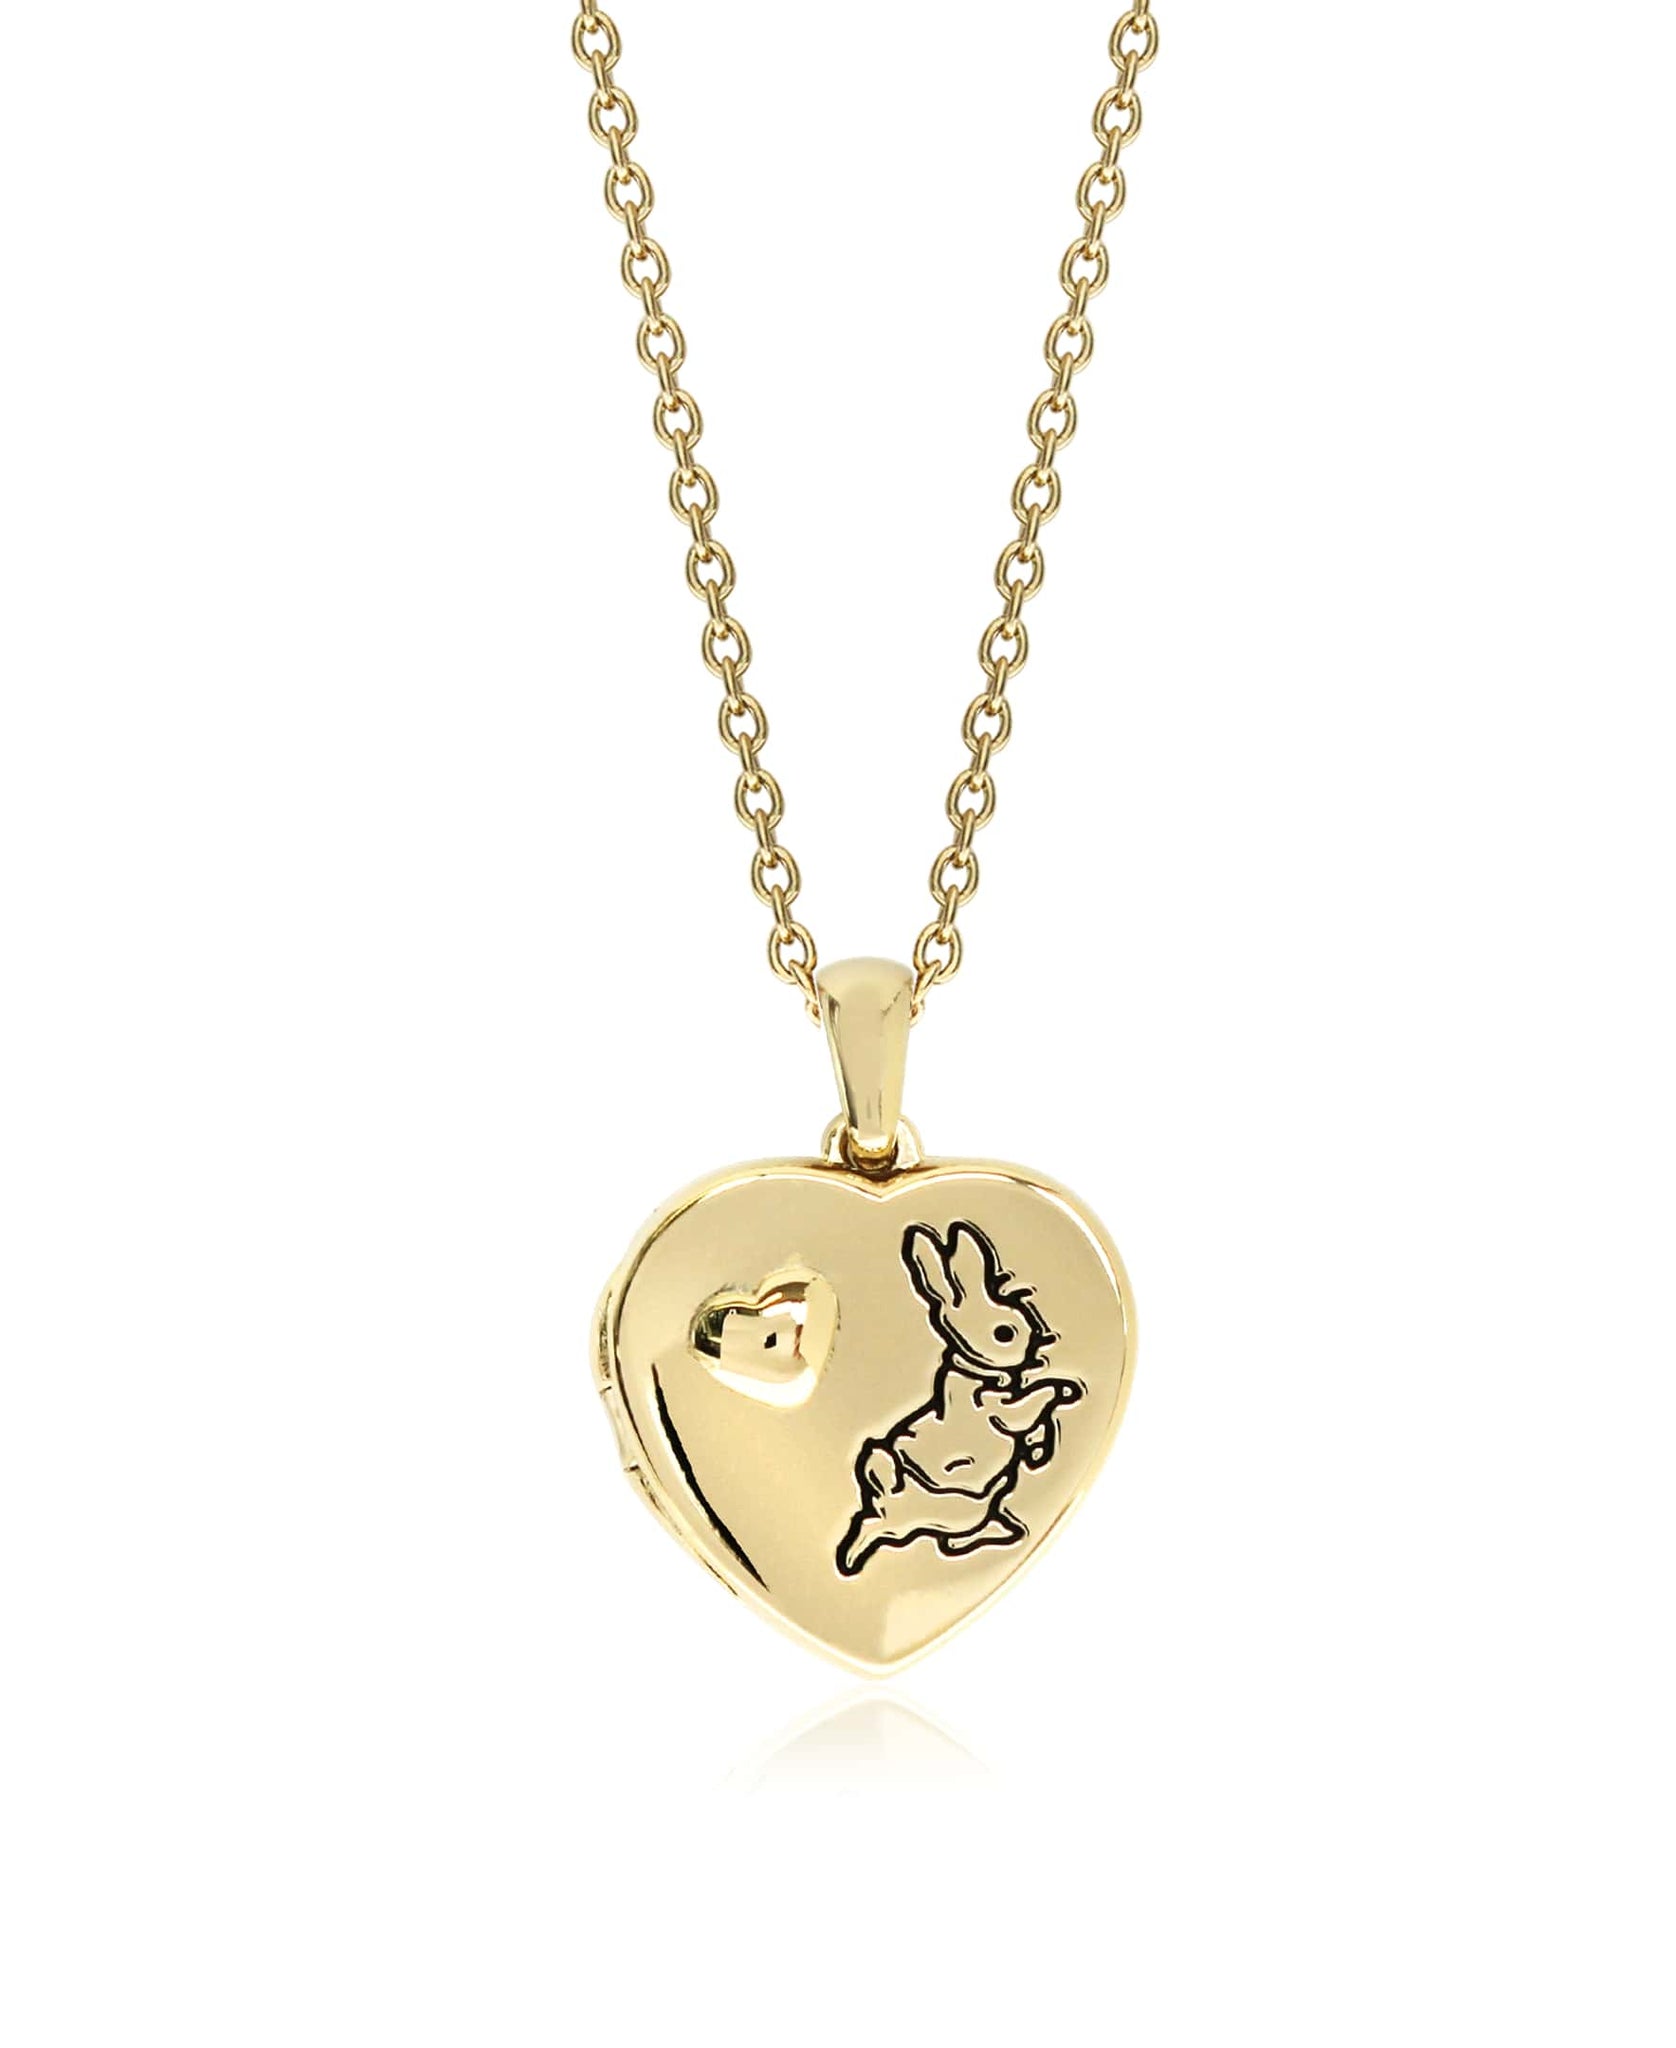 Beatrix Potter Gold Plated Sterling Silver Peter Rabbit Heart Locket Necklace - Rhona Sutton Jewellery